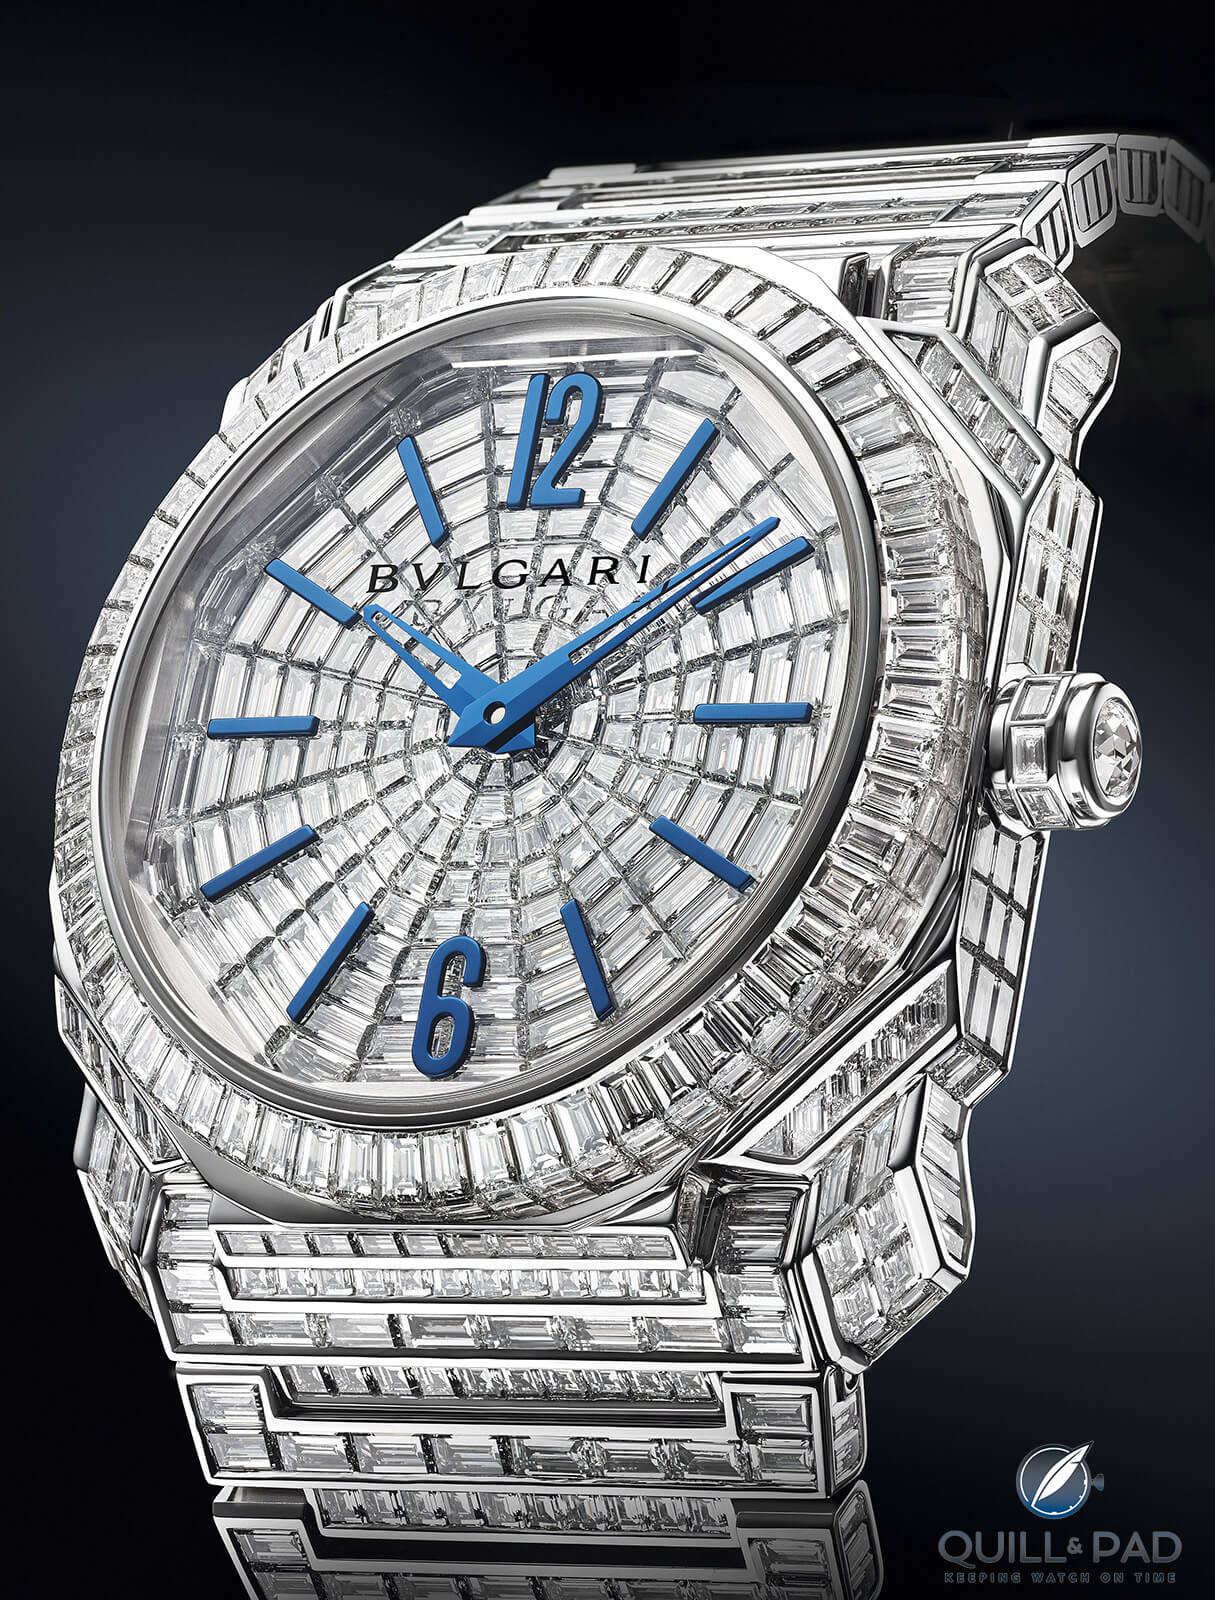 Bulgari Octo L'Originale: With Enough Ice To Alleviate Climate Change And A  Million-Dollar Price Tag To Match - Quill & Pad